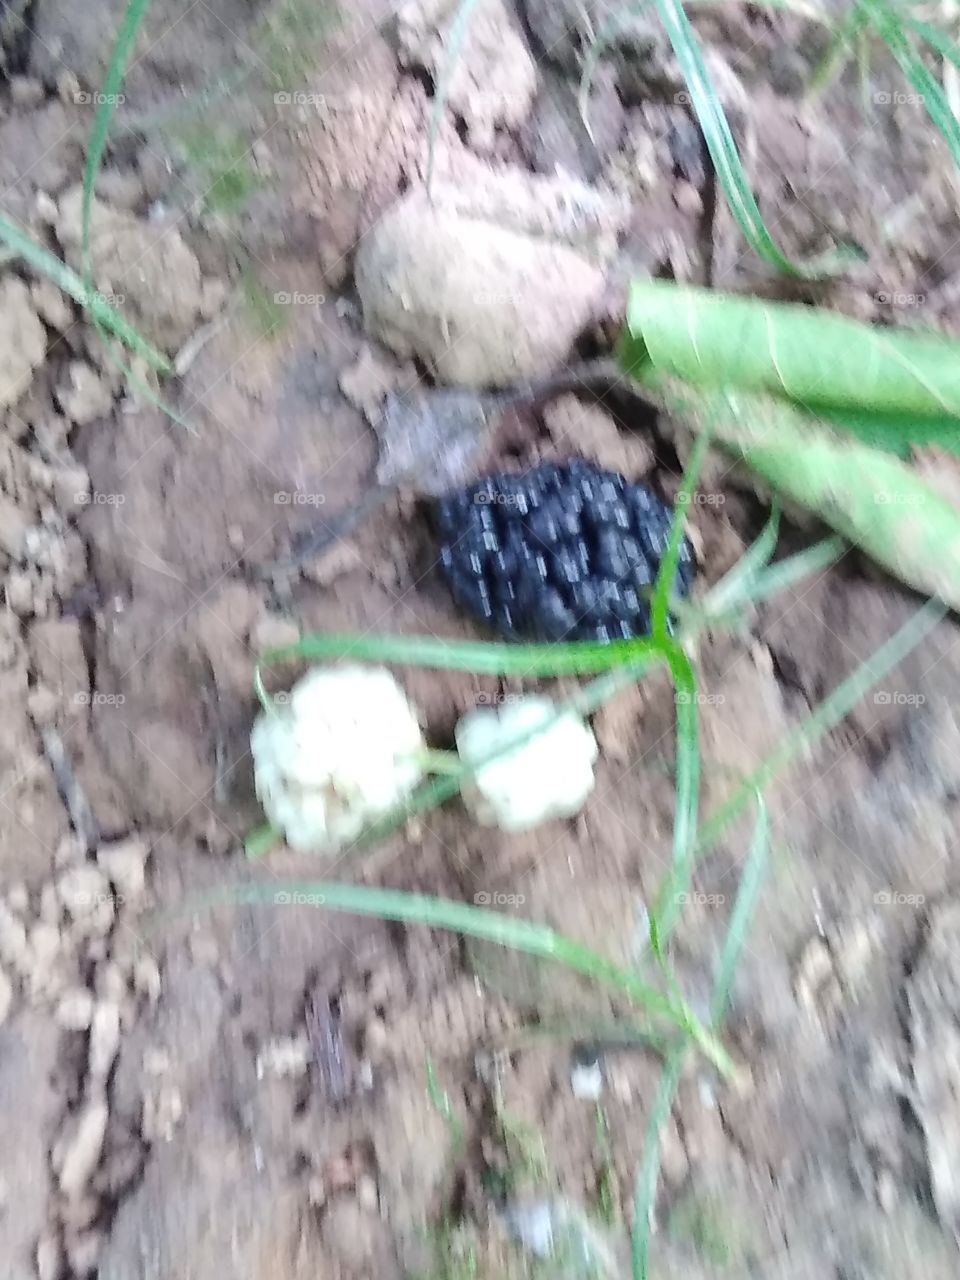 Black and White mulberries on the ground